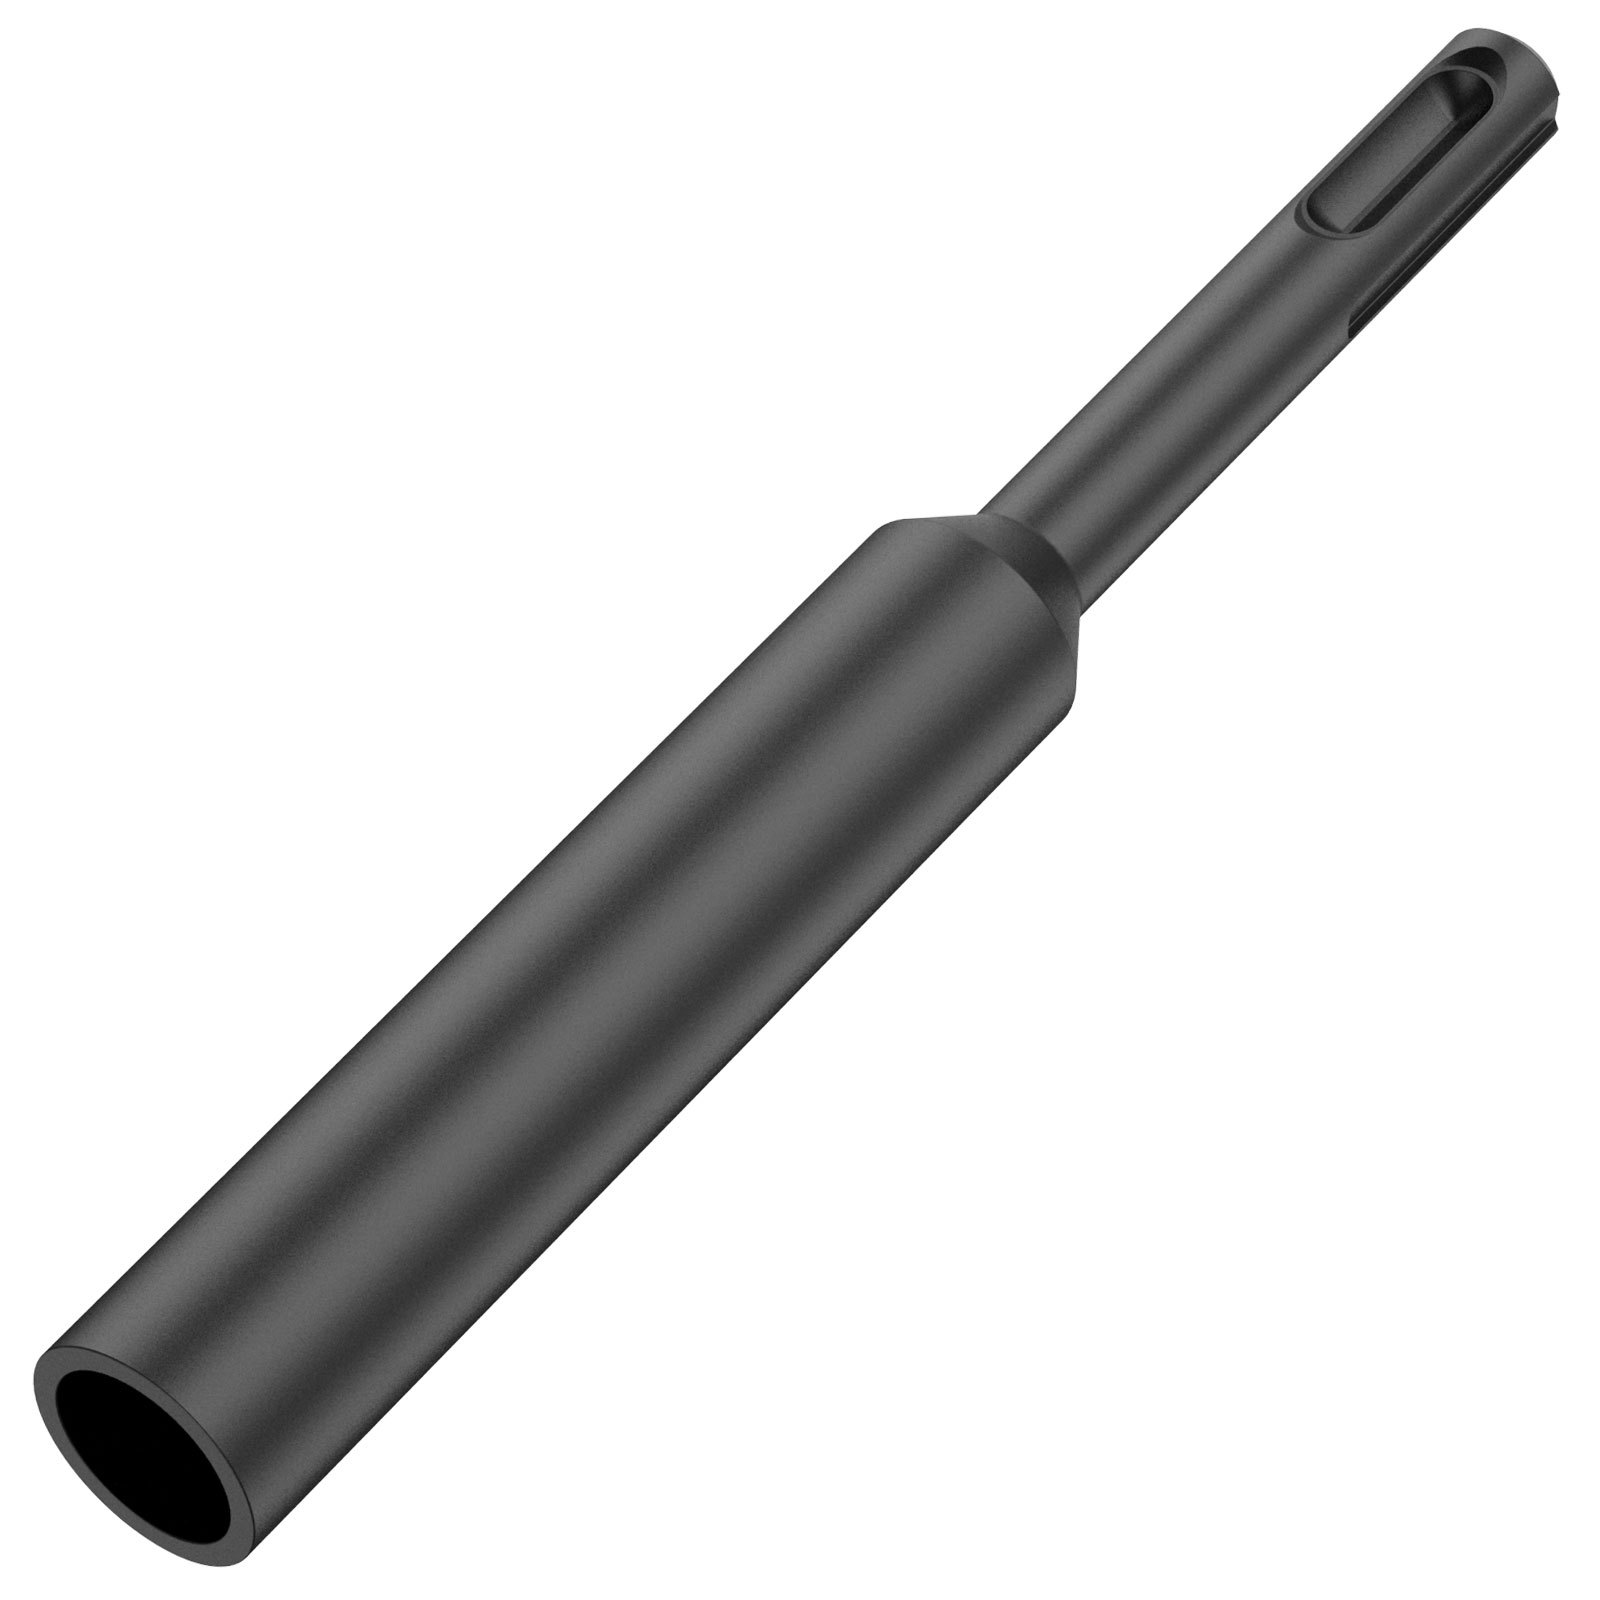 SDS Ground Rod Driver Bit For 5/8 Inch And 3/4 Inch Ground Rods  Professional Ground Rod Driver Durable Hardened Earth Driving Rod Work With  SDS And SD